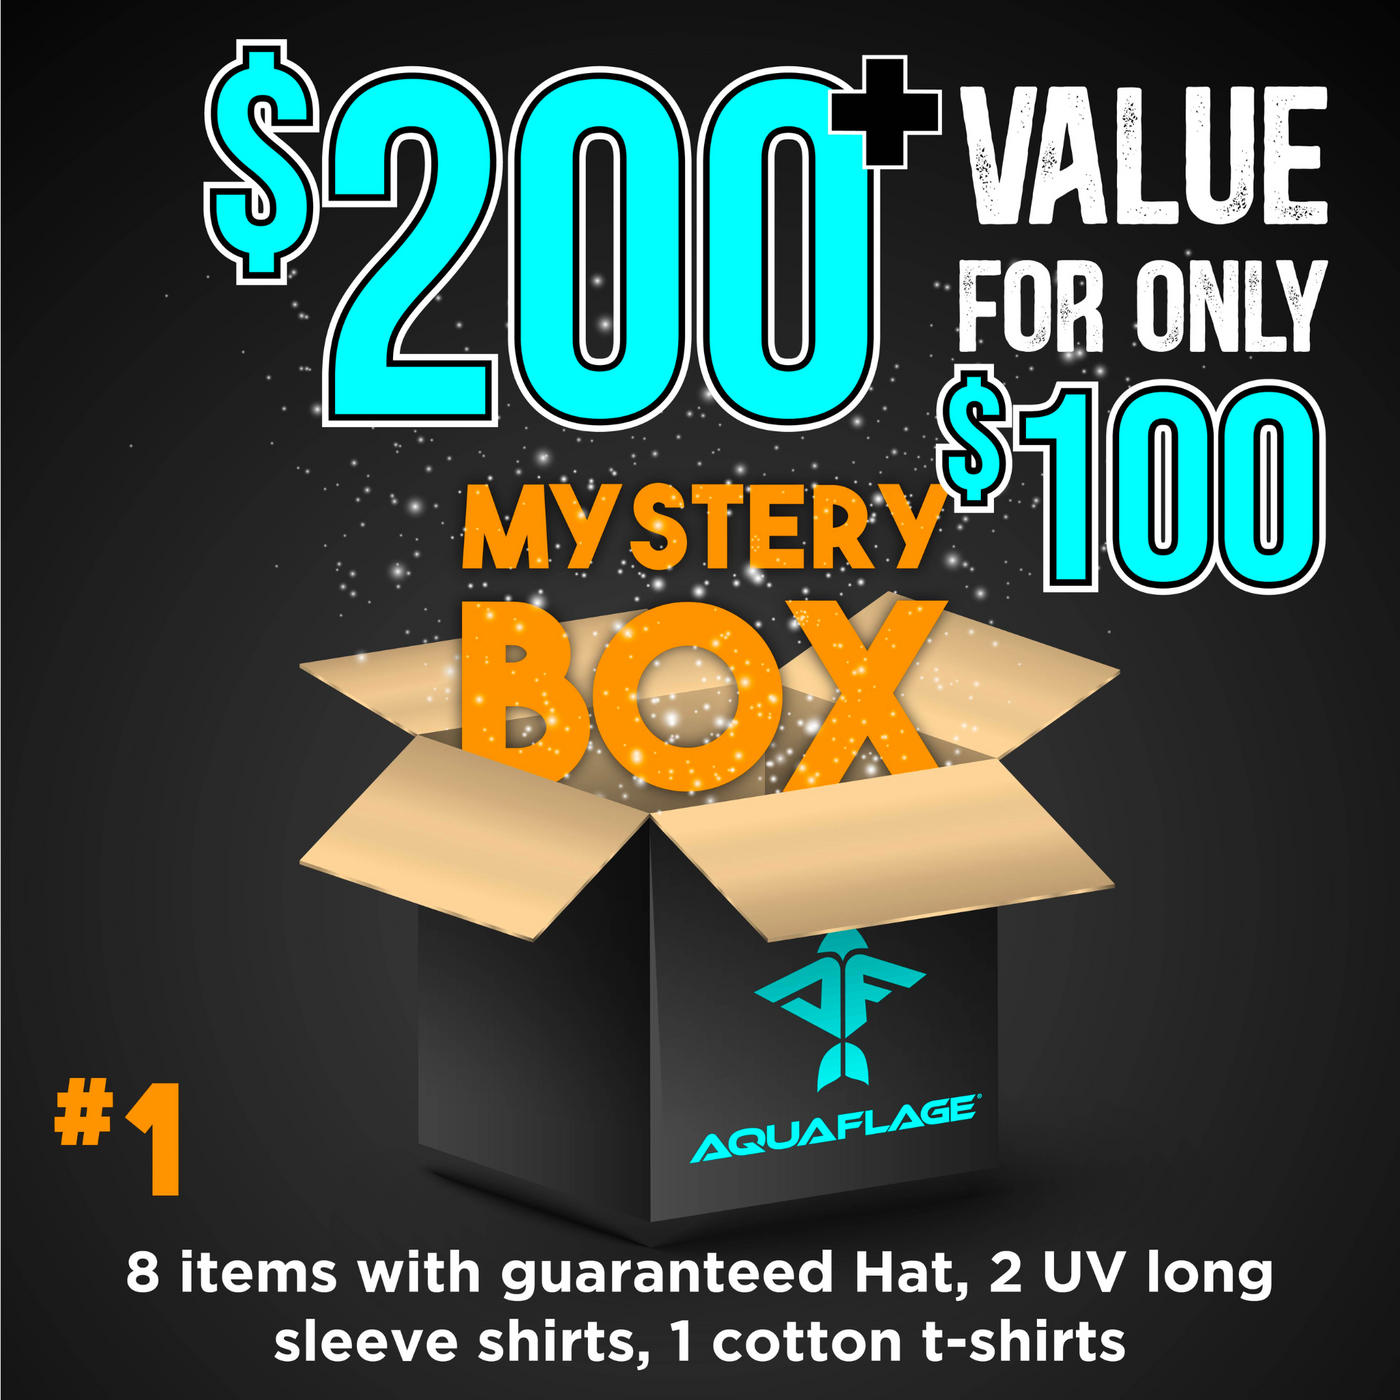 $200+ Value For $100 Mystery Box!